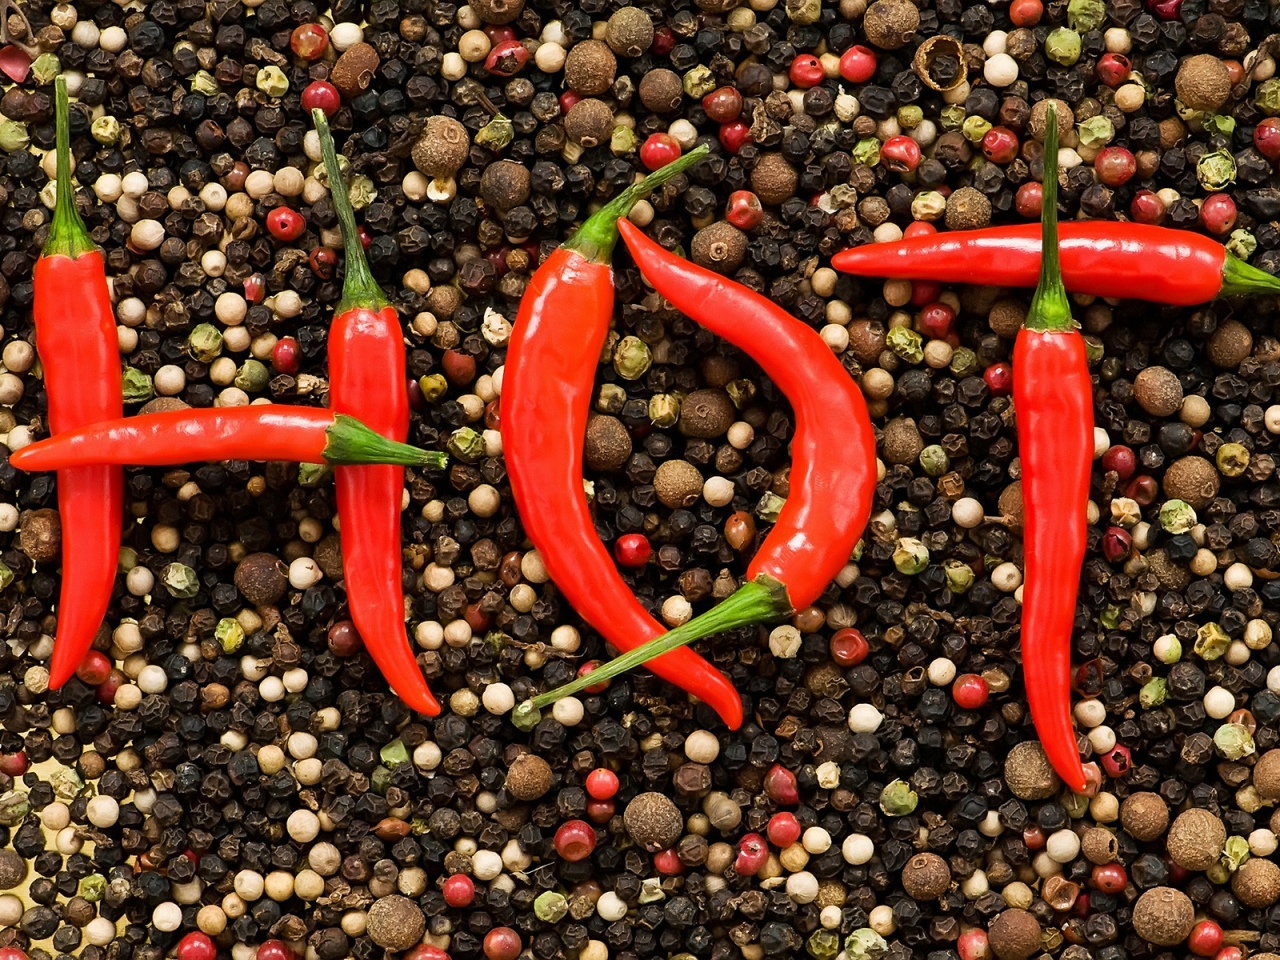 Hot Chilli and Pepper for 1280 x 960 resolution